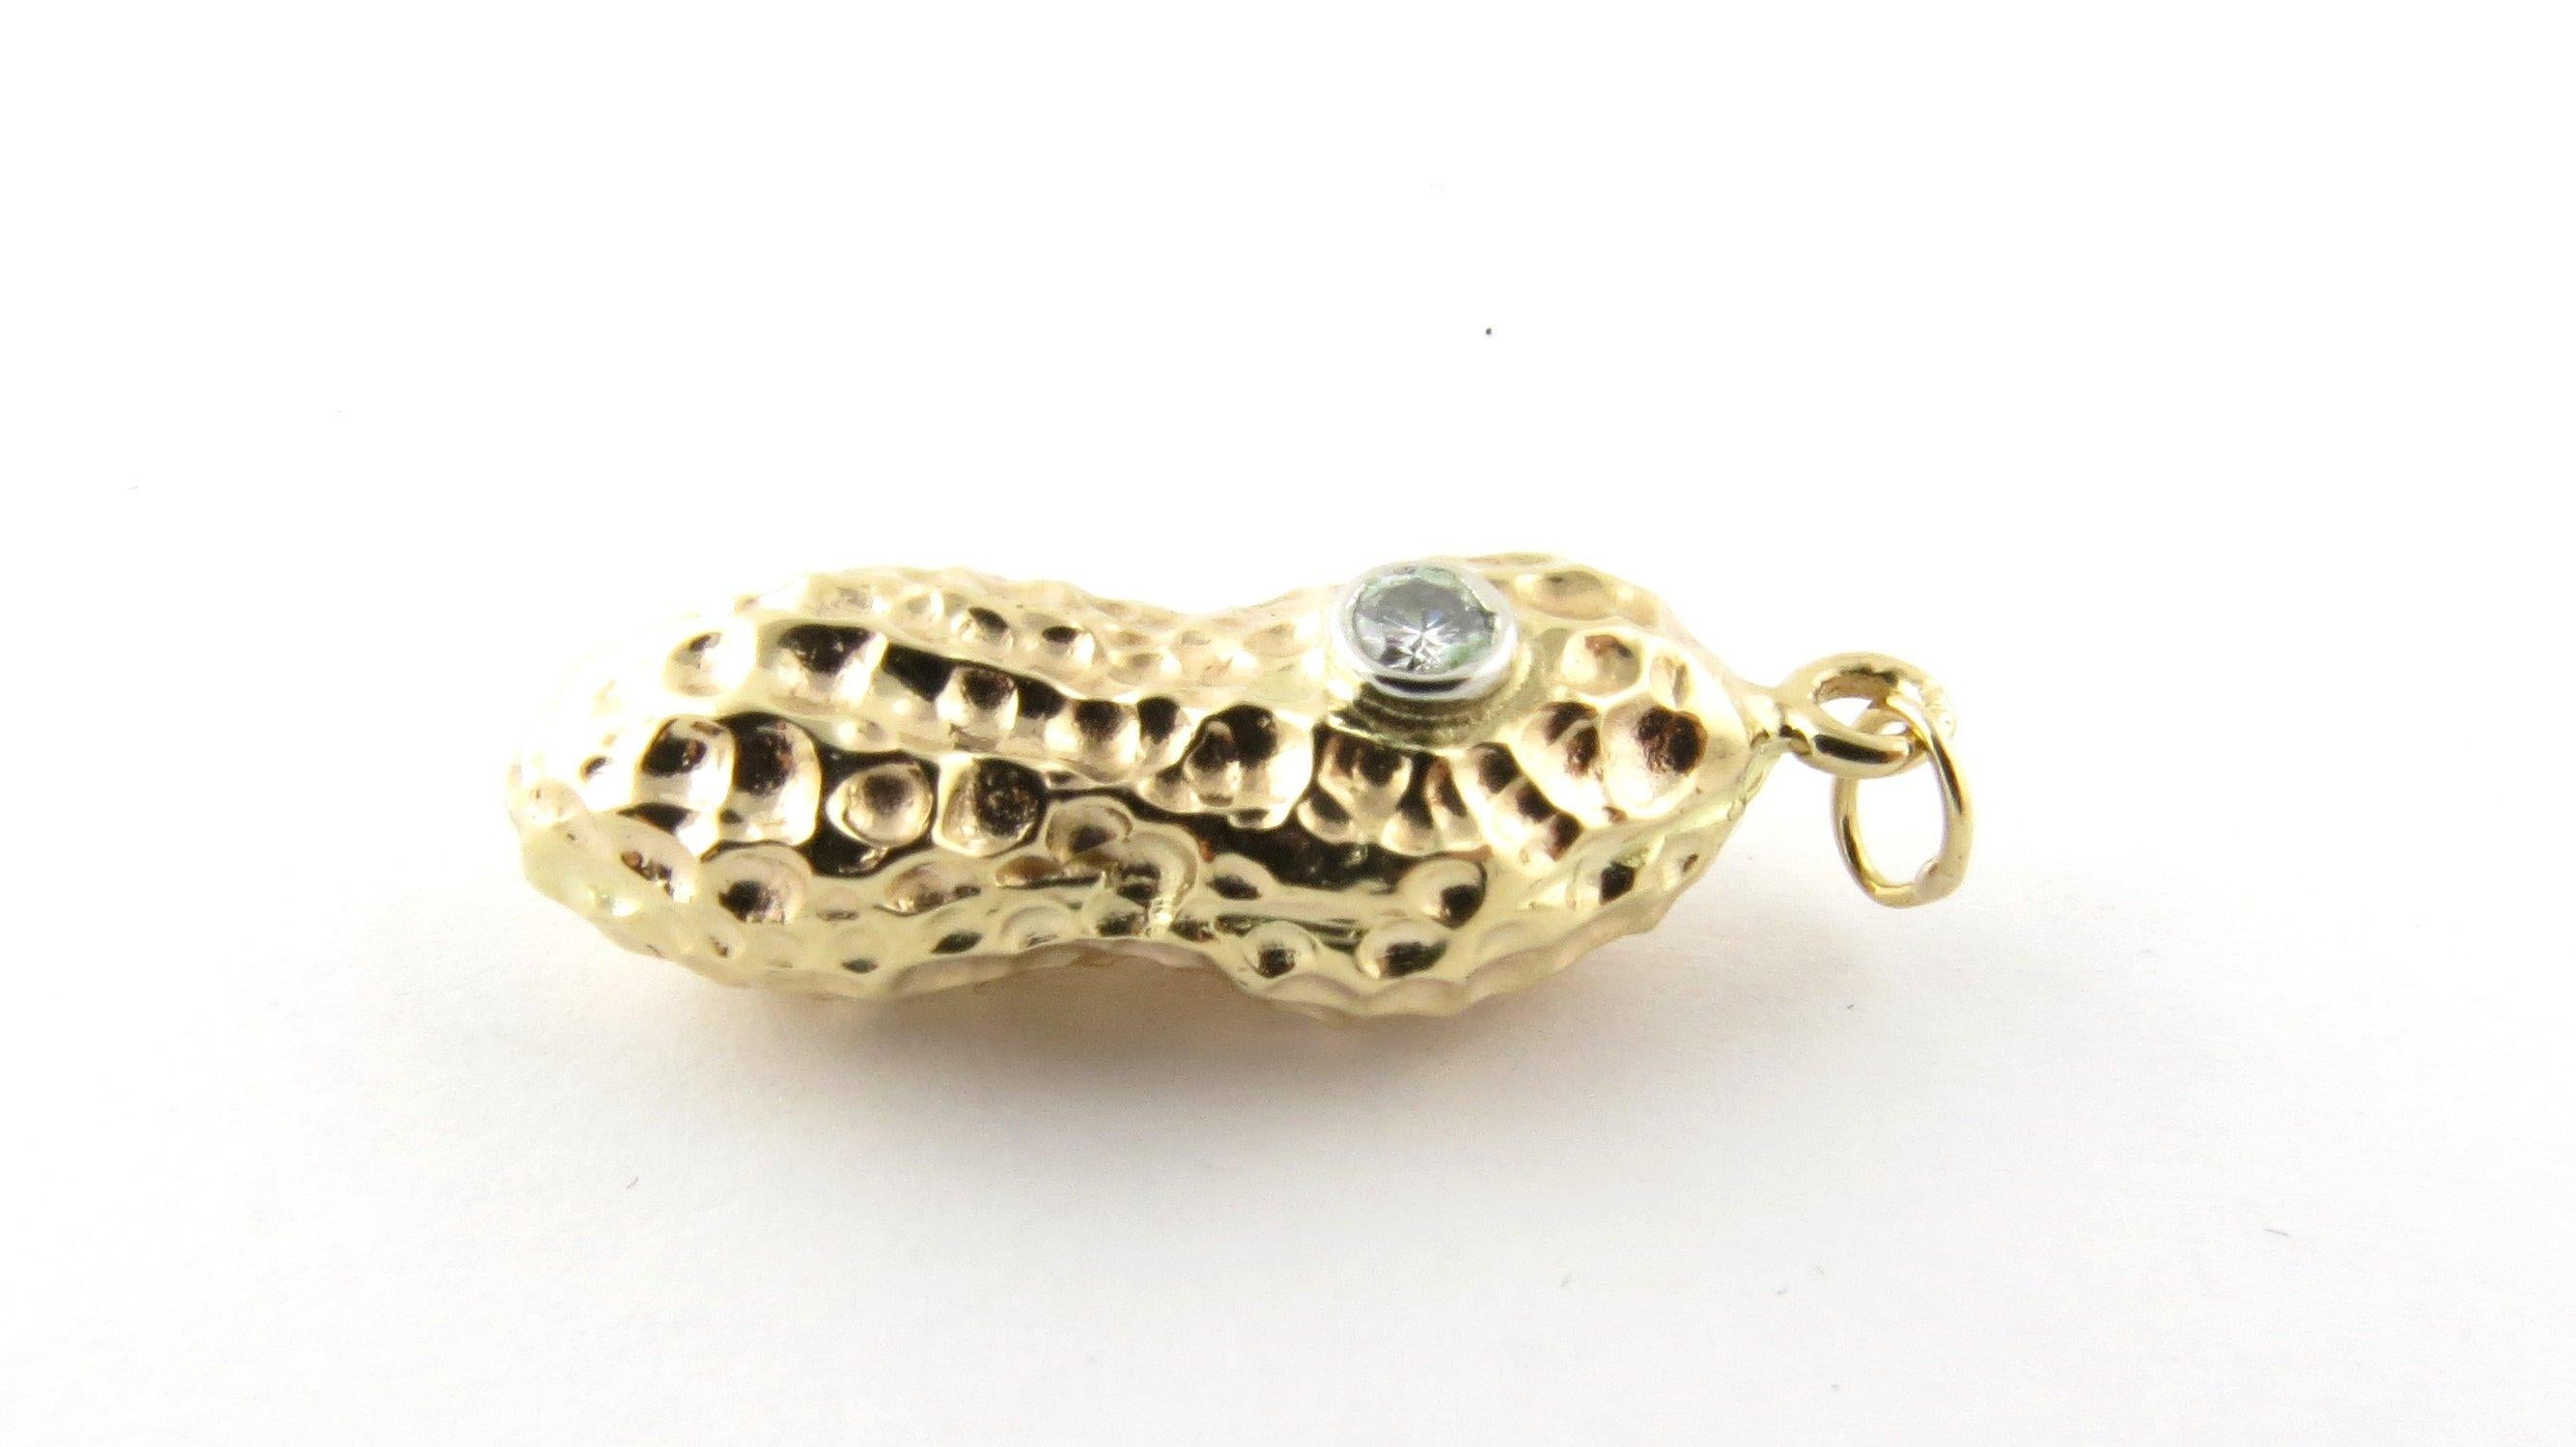 Vintage 14 Karat Yellow Gold and Diamond Peanut Pendant. The peanut represents good fortune and fertility! This lovely 3D charm features a beautifully detailed peanut accented with one round brilliant cut diamond.
Approximate total diamond weight: